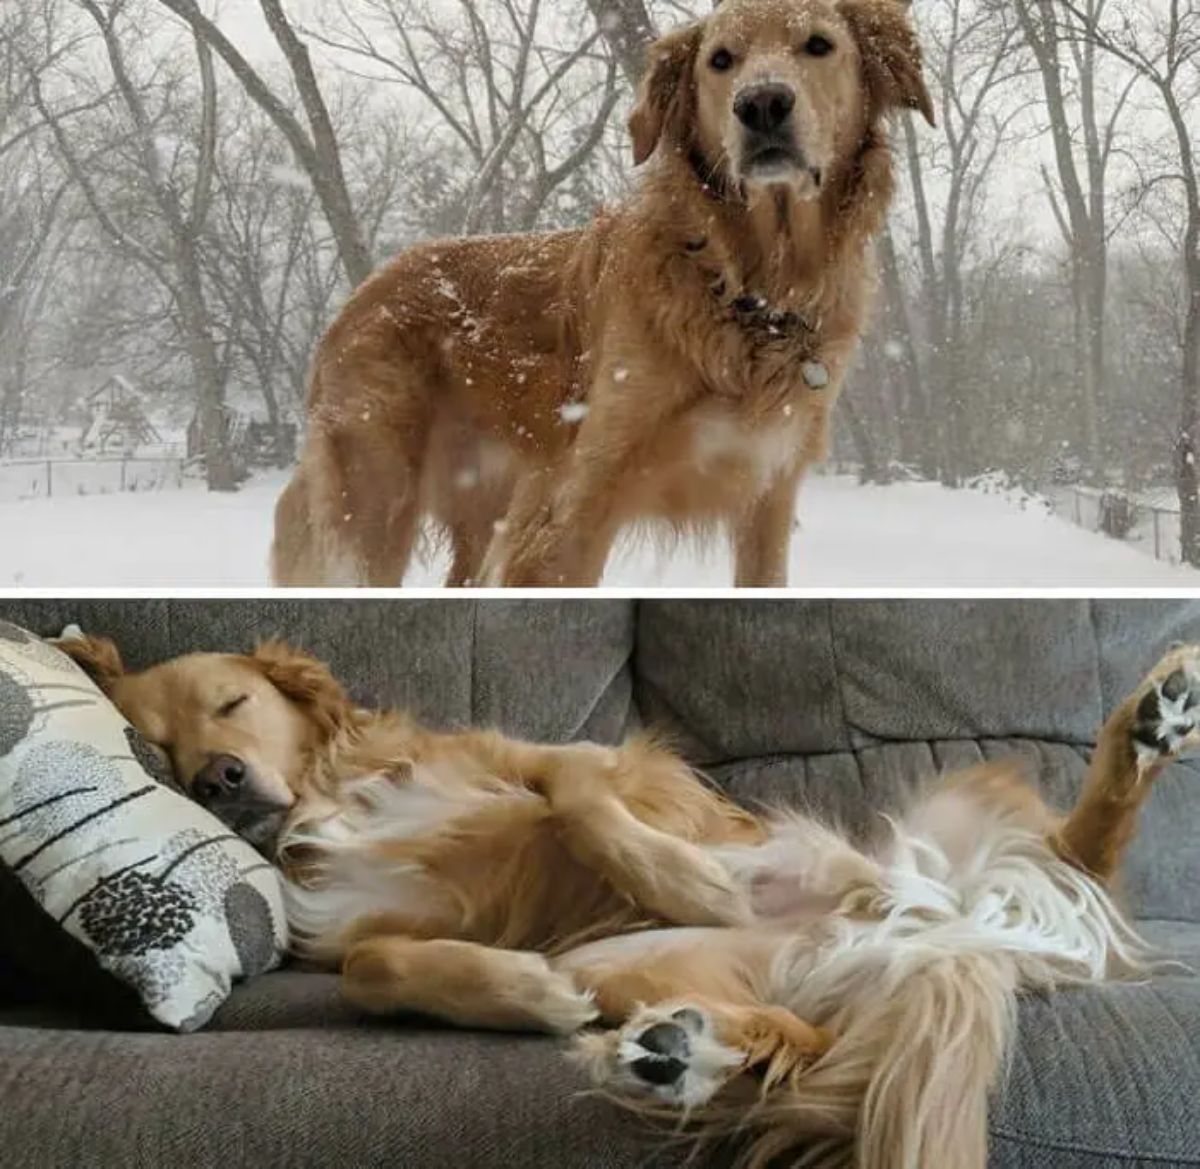 1 photo of a golden retriever standing in the snow and 1 photo of the same dog sleeping laying down on a grey sofa